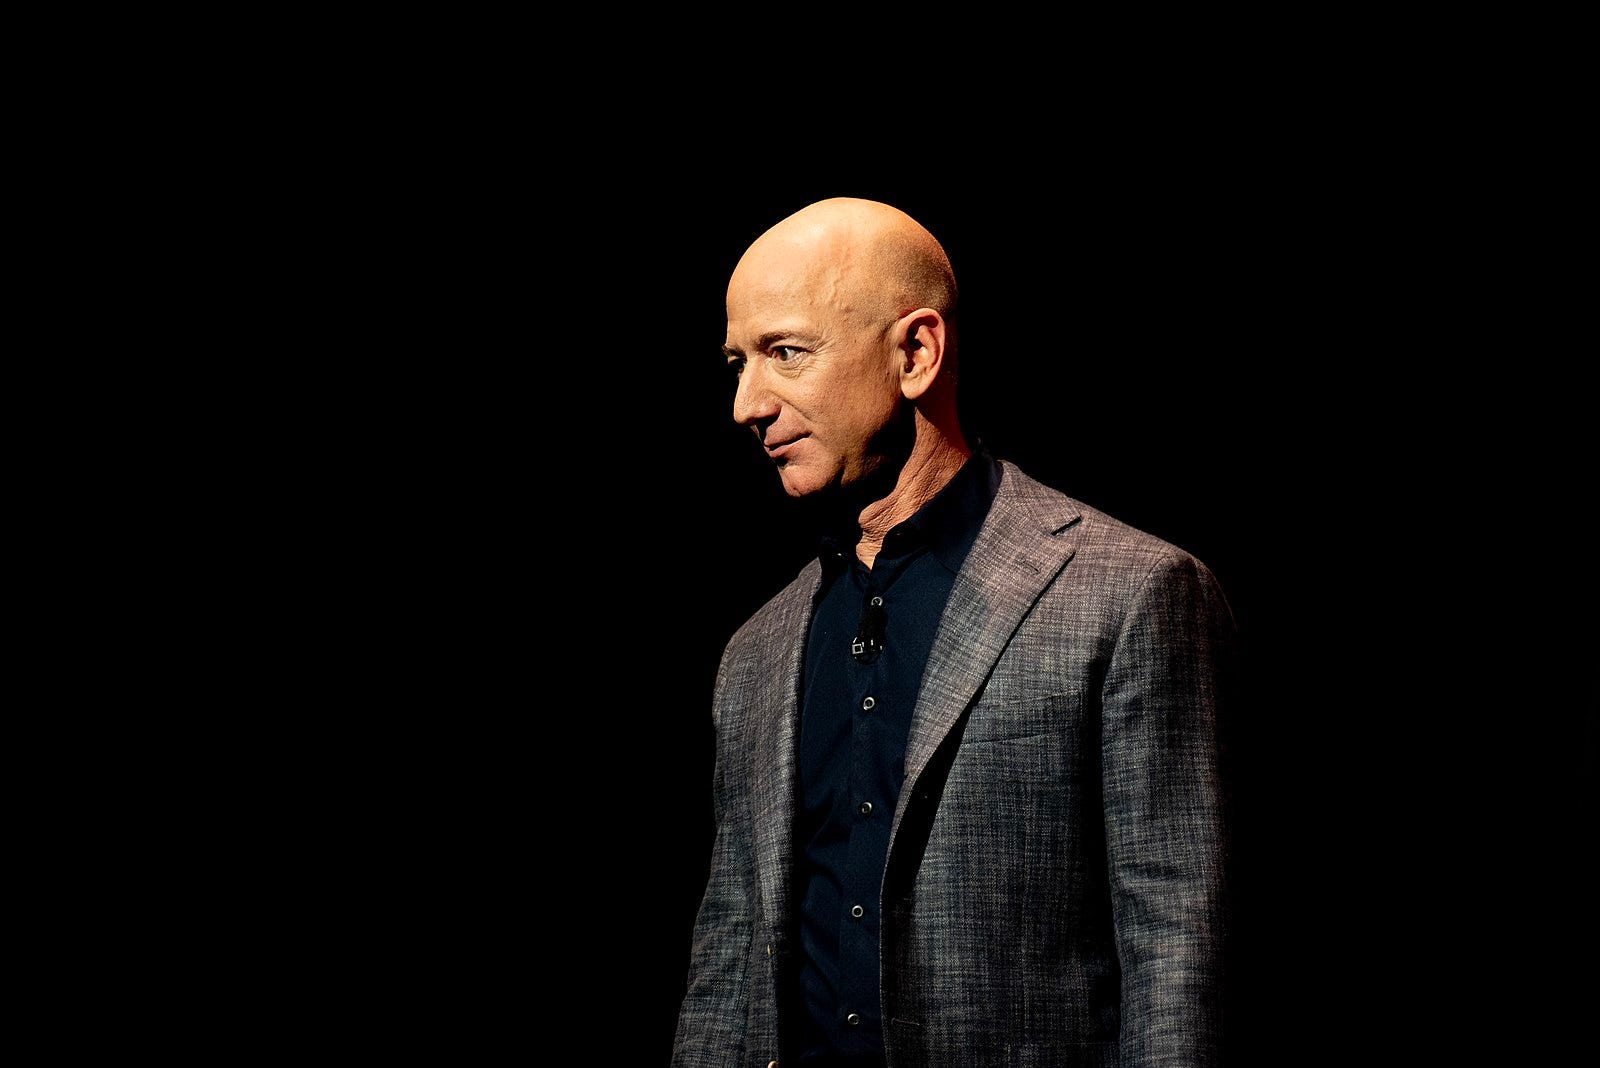 Jeff Bezos Pledges $1B To Aid Conservation Efforts As Part Of $10B Earth Fund